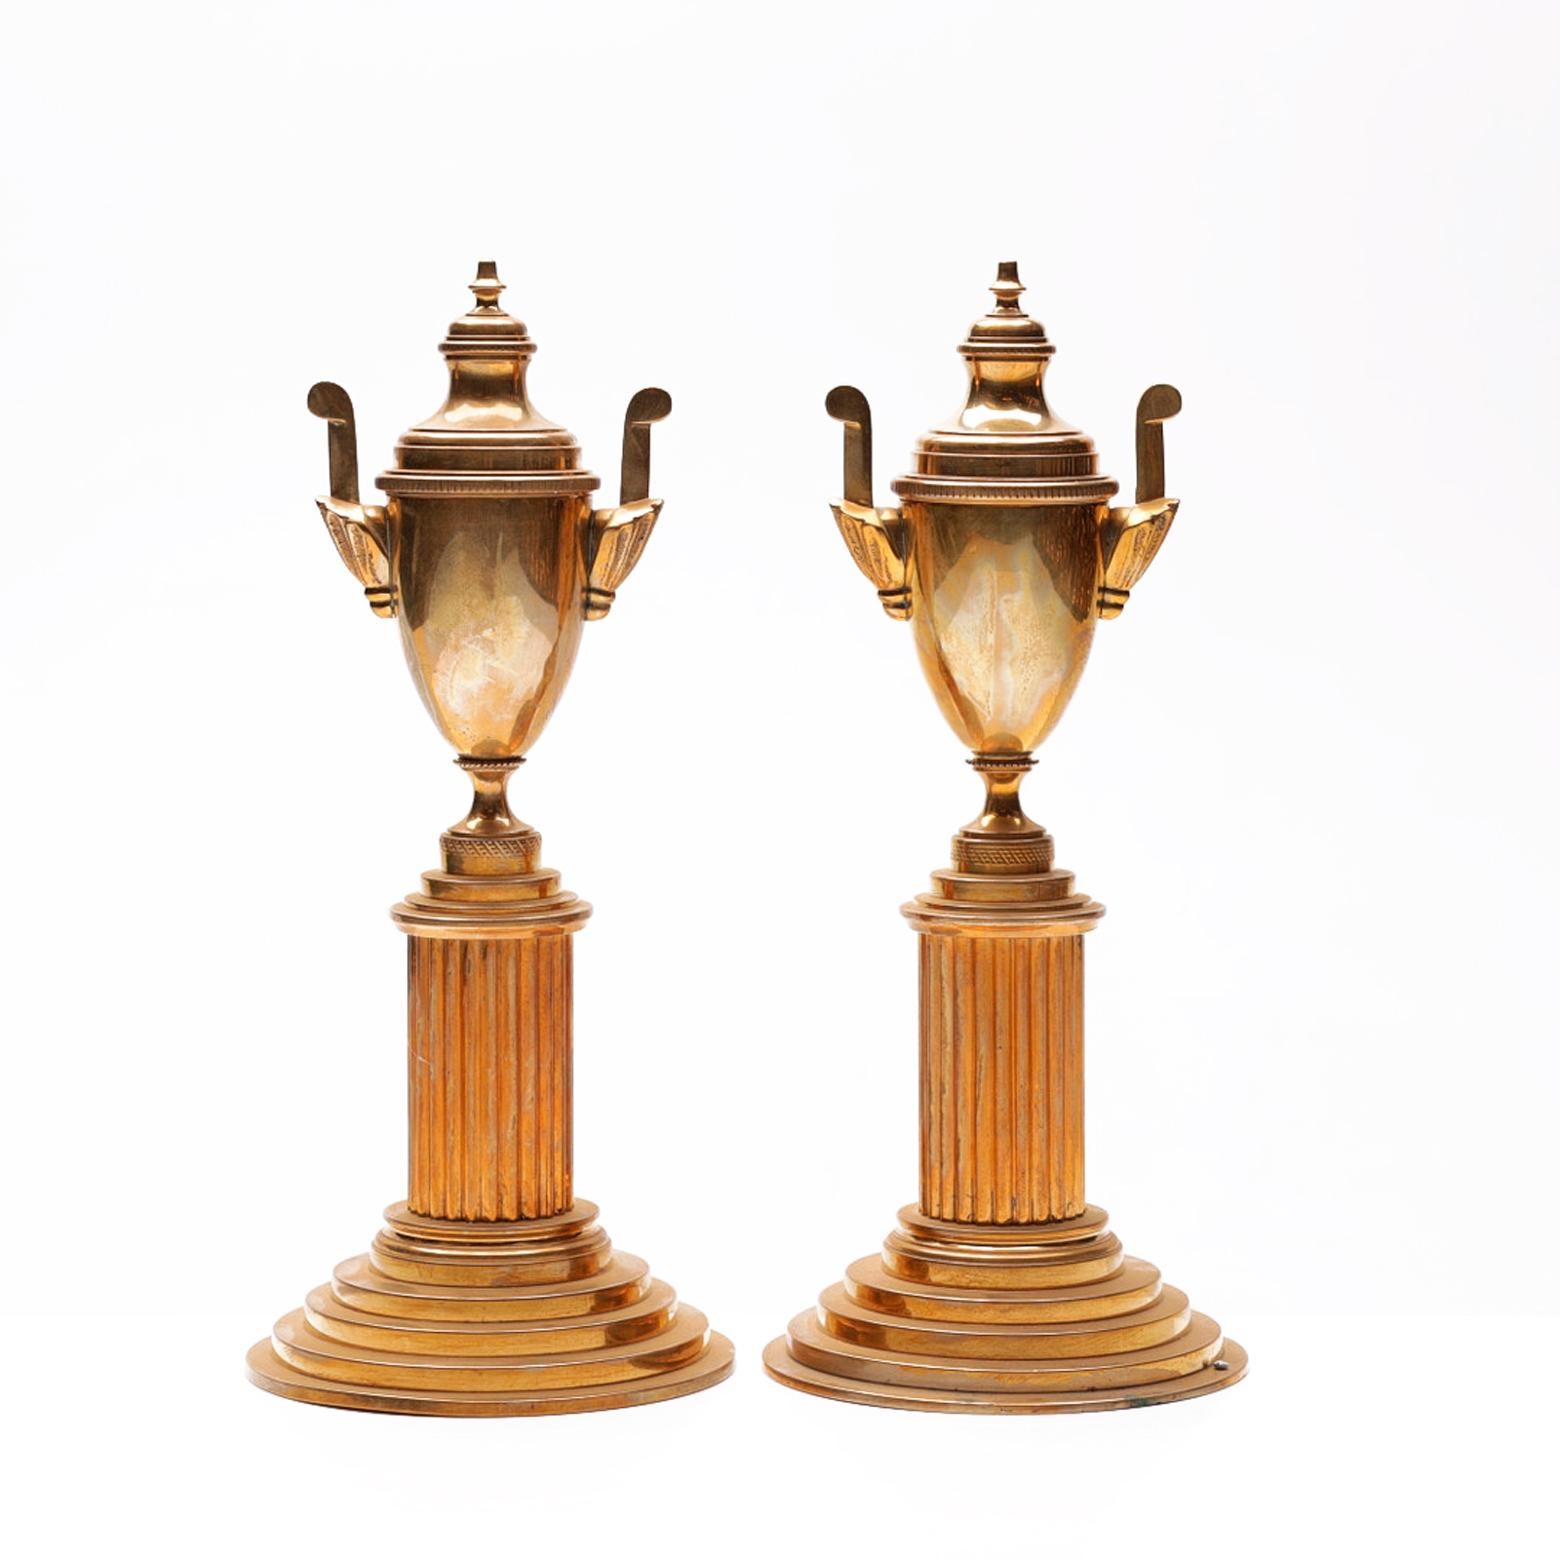 A pair of Swedish brass Cassolettes made in Skultuna, 1900-century. (number_60A) The tops can be screwed of, so that they can either be used as candlesticks or decorative objects depicting a urn on a pillar. Good quality on the casting.